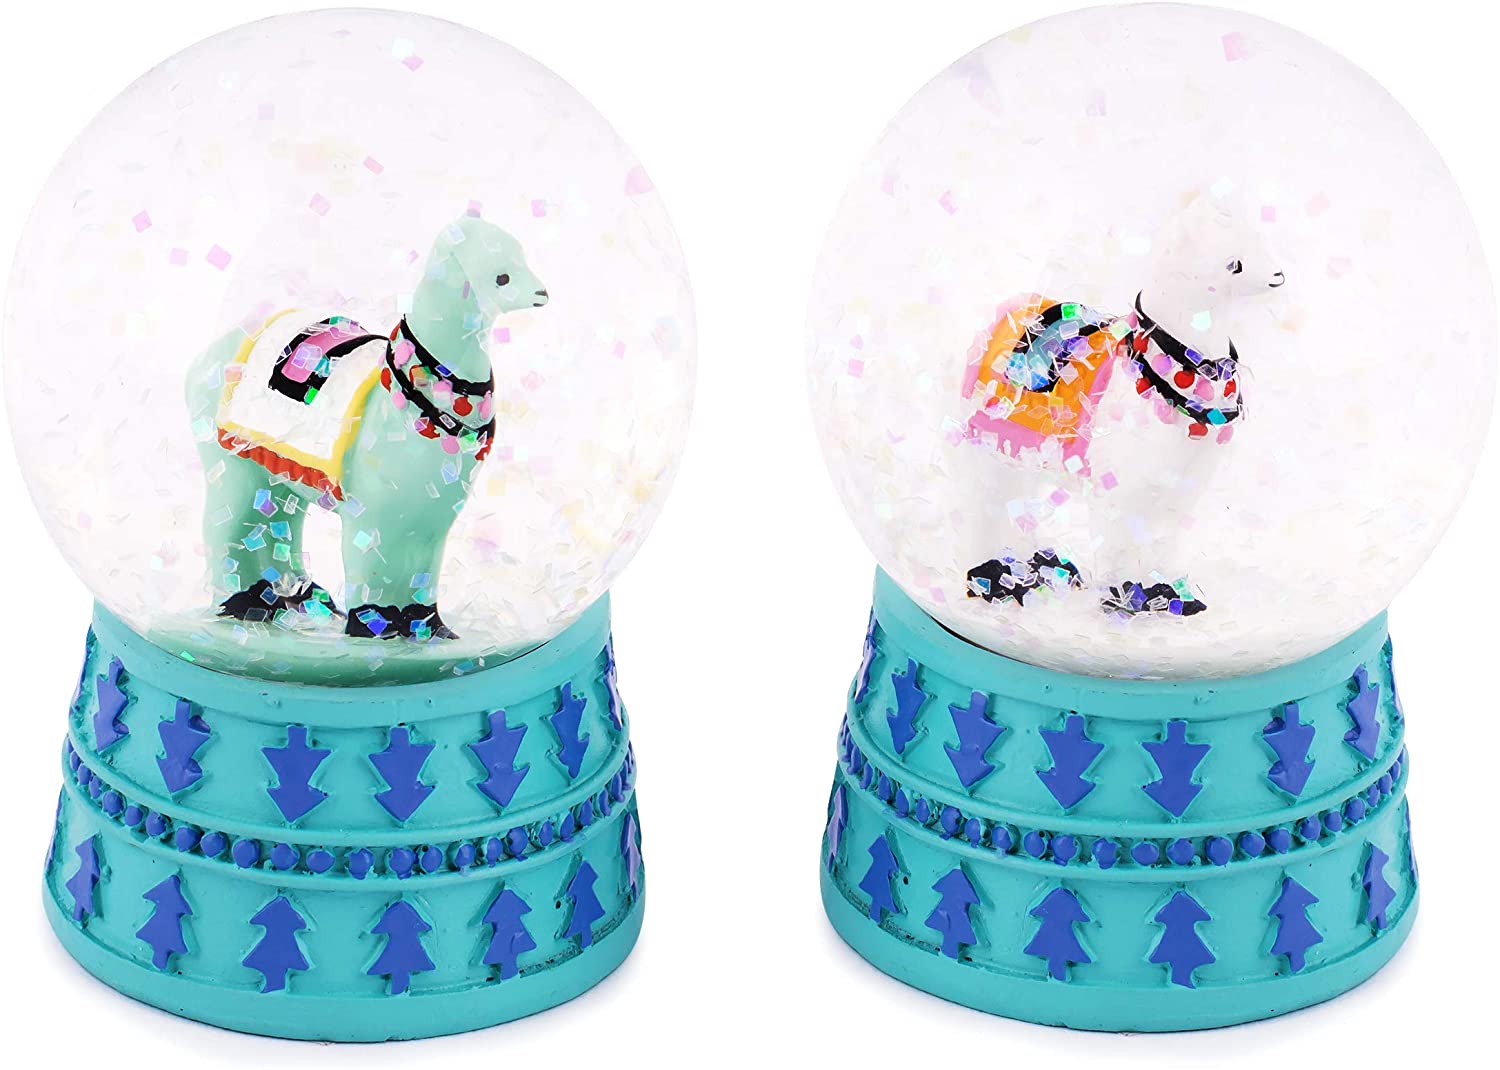 Pajoma Snow Globe Alpaca Ruediger, Size S In Pack Of 2